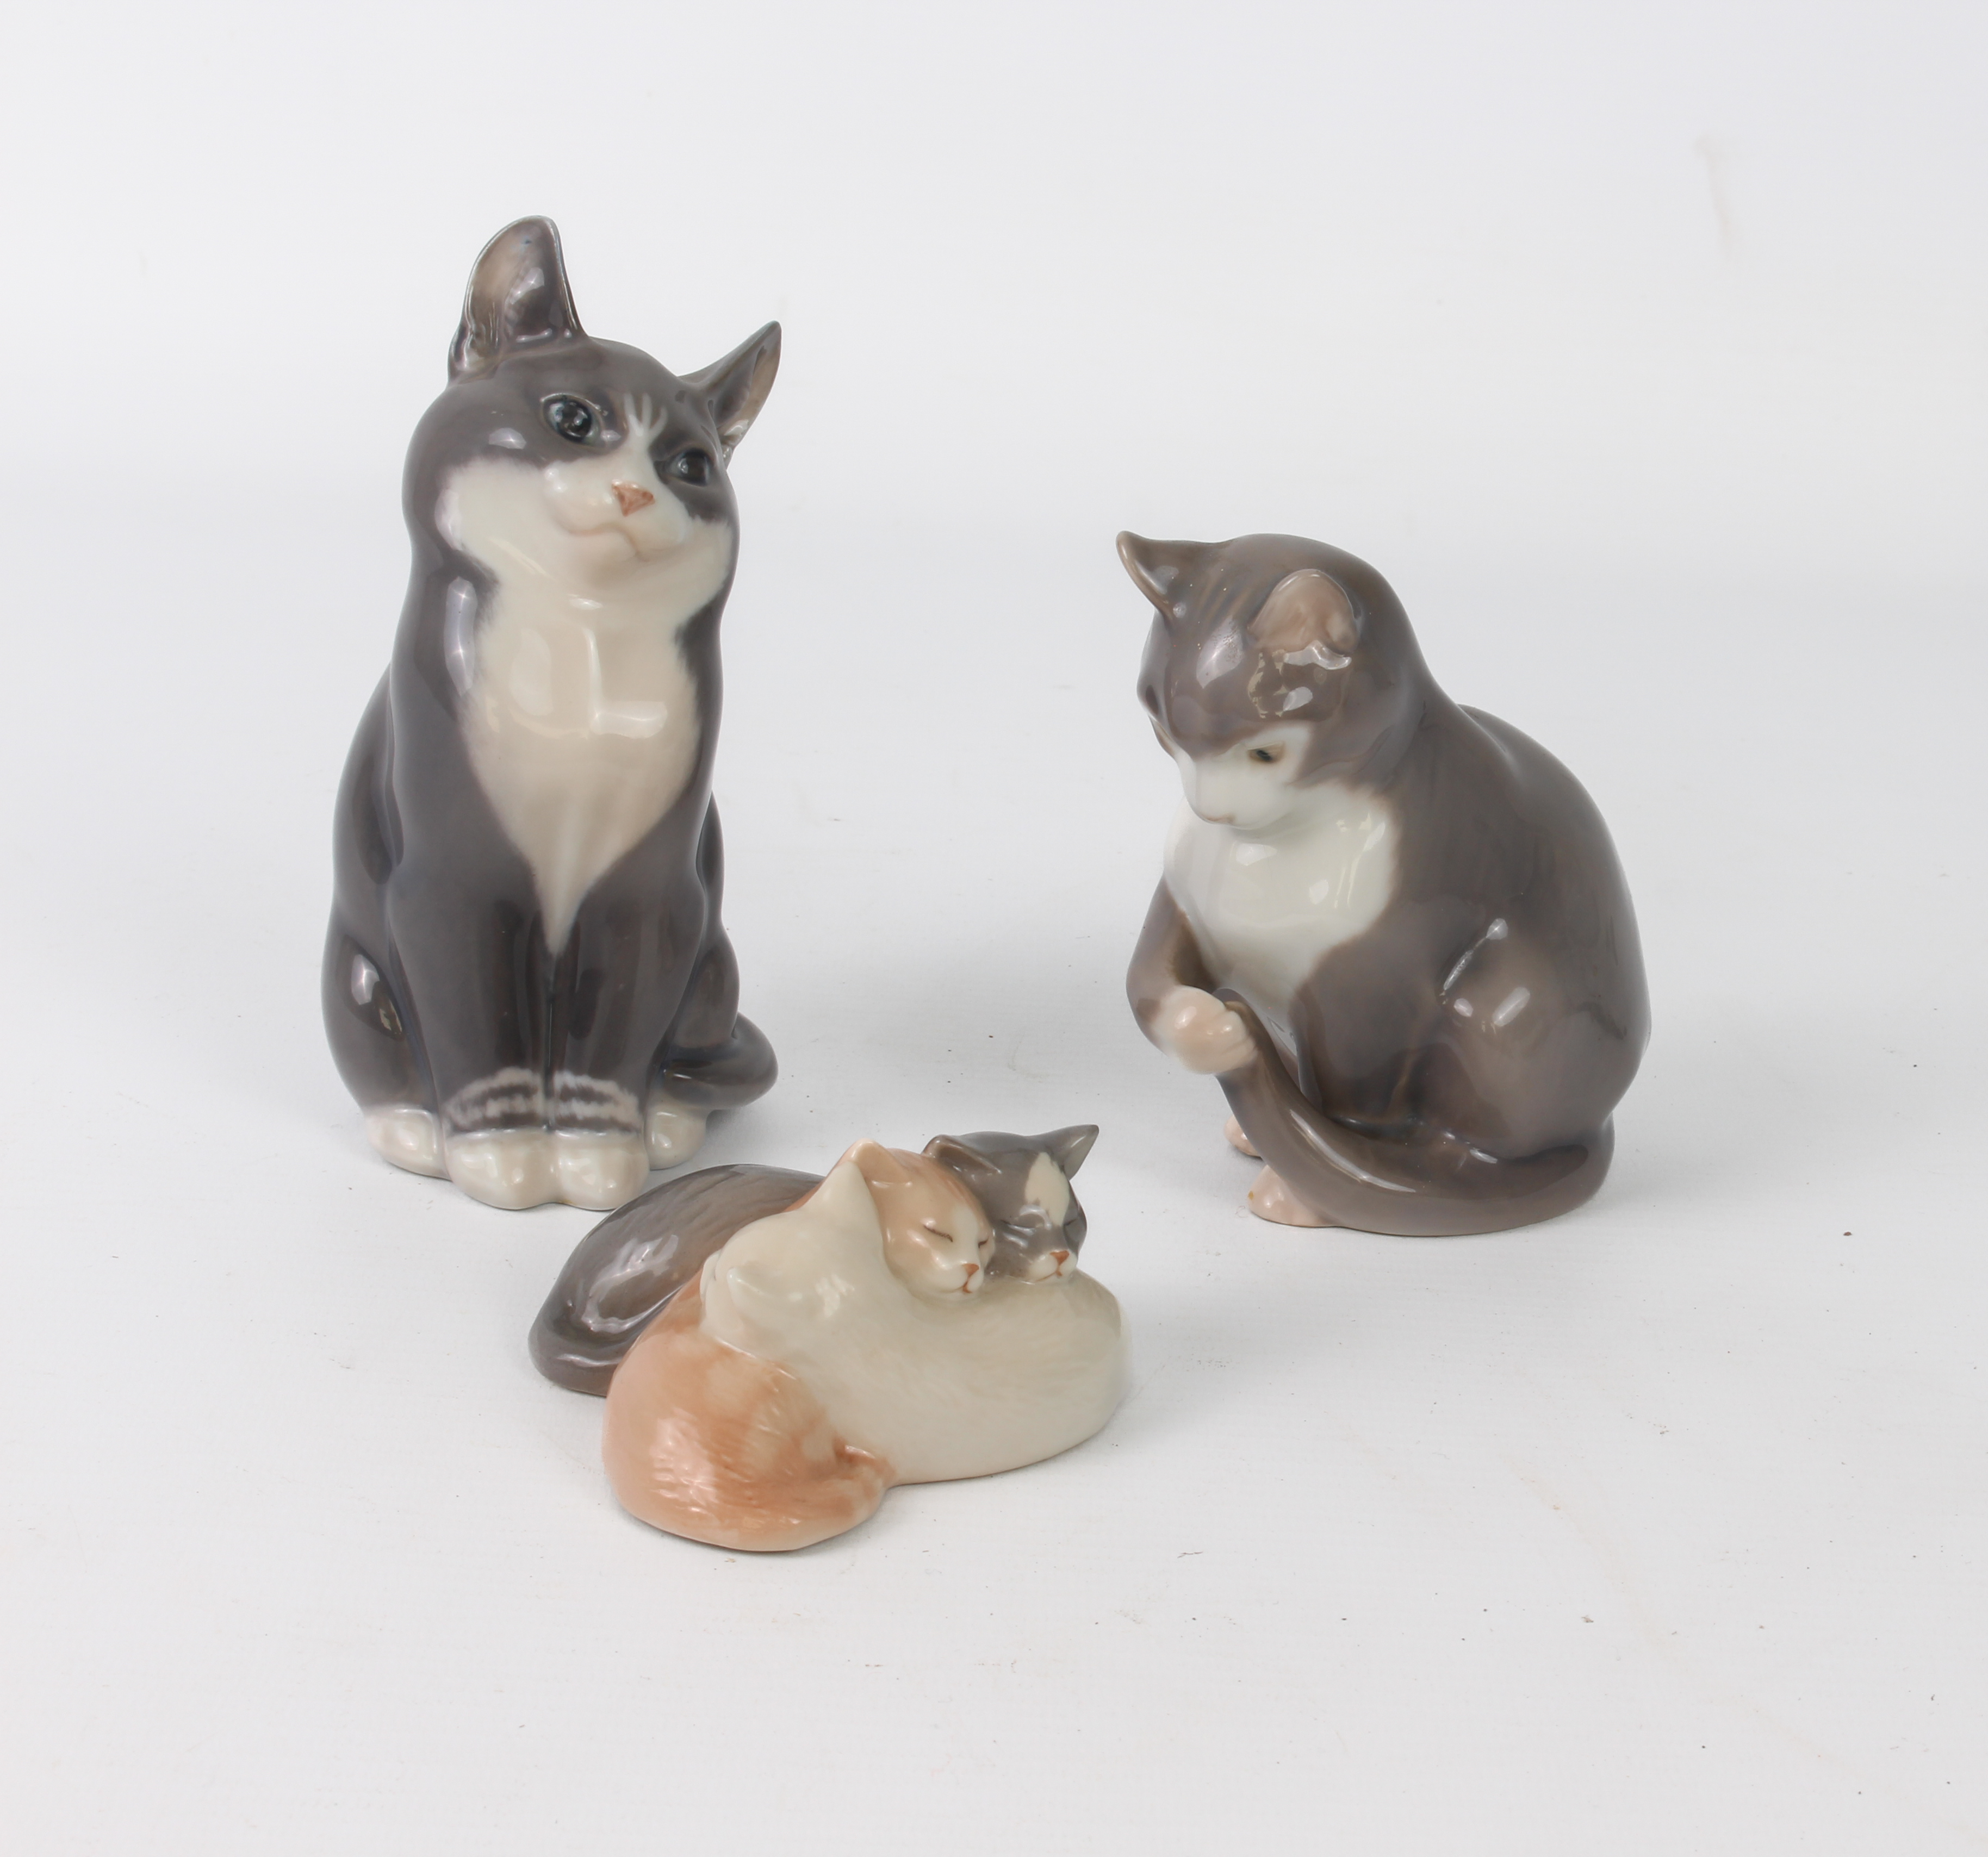 Three porcelain figures of Cats by Royal Copenhagen and Bing & Grondahl - comprising a Royal